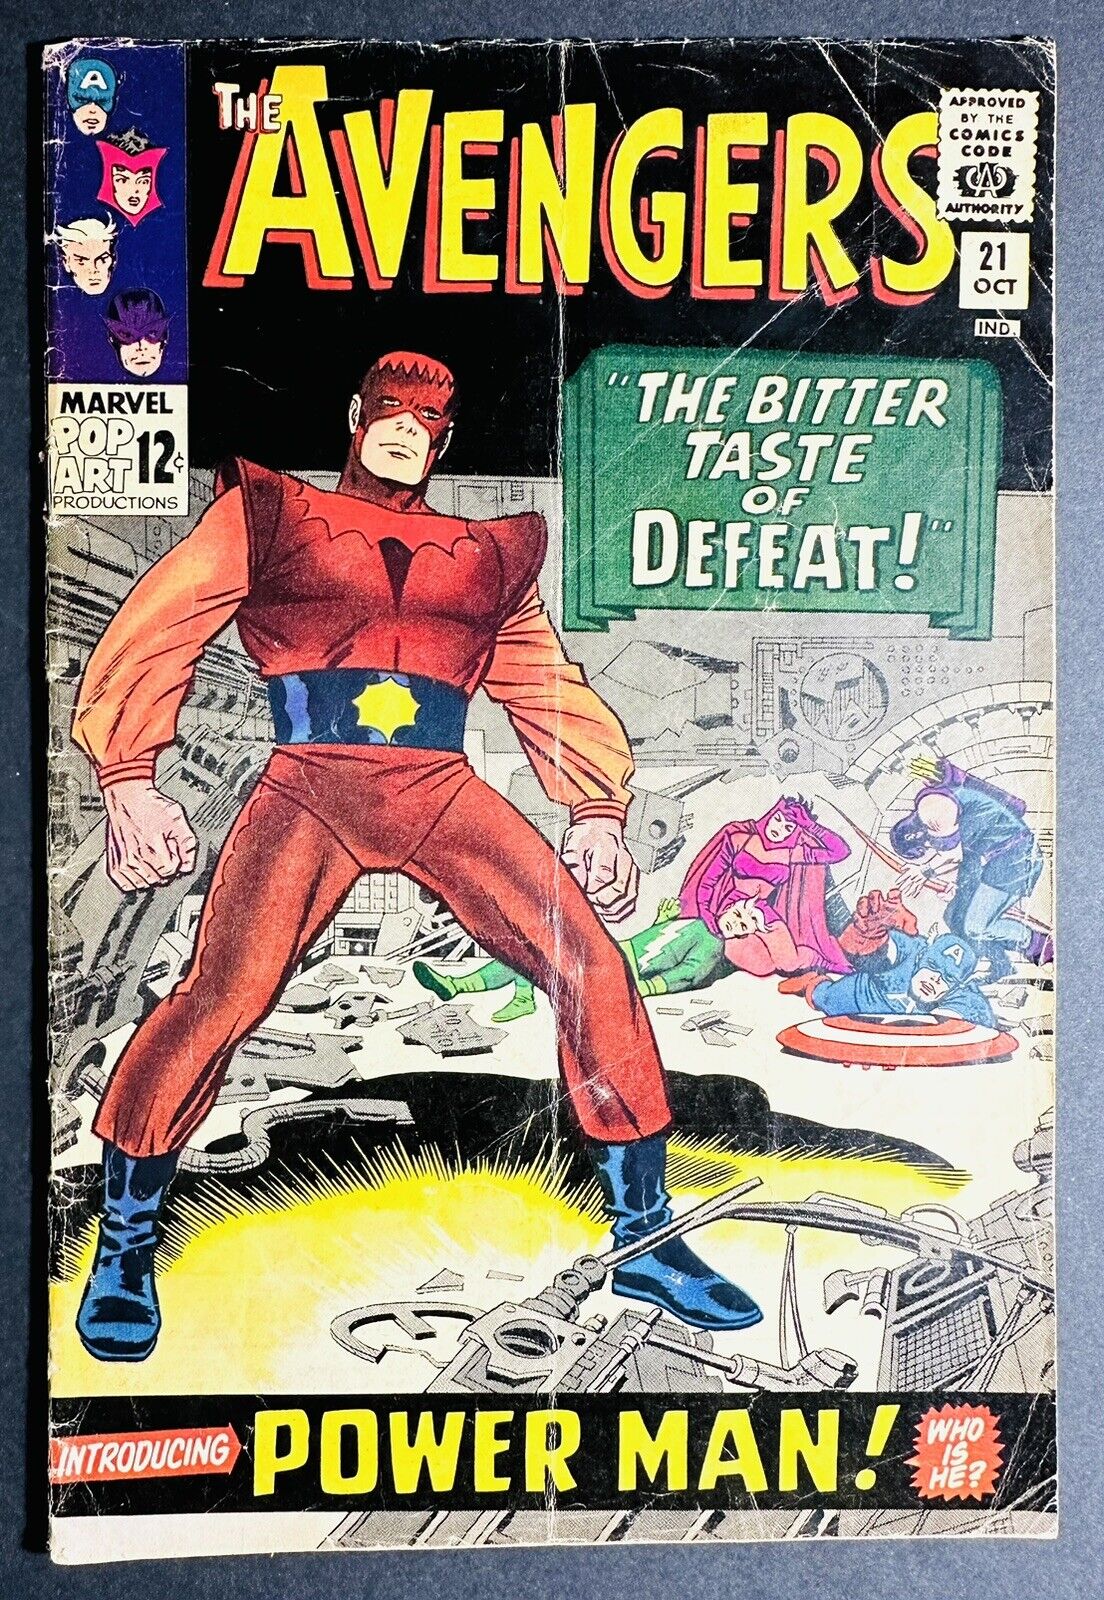 The Avengers #21 Marvel Comics 1965 Kirby Cover Stan Lee - 1st Power Man